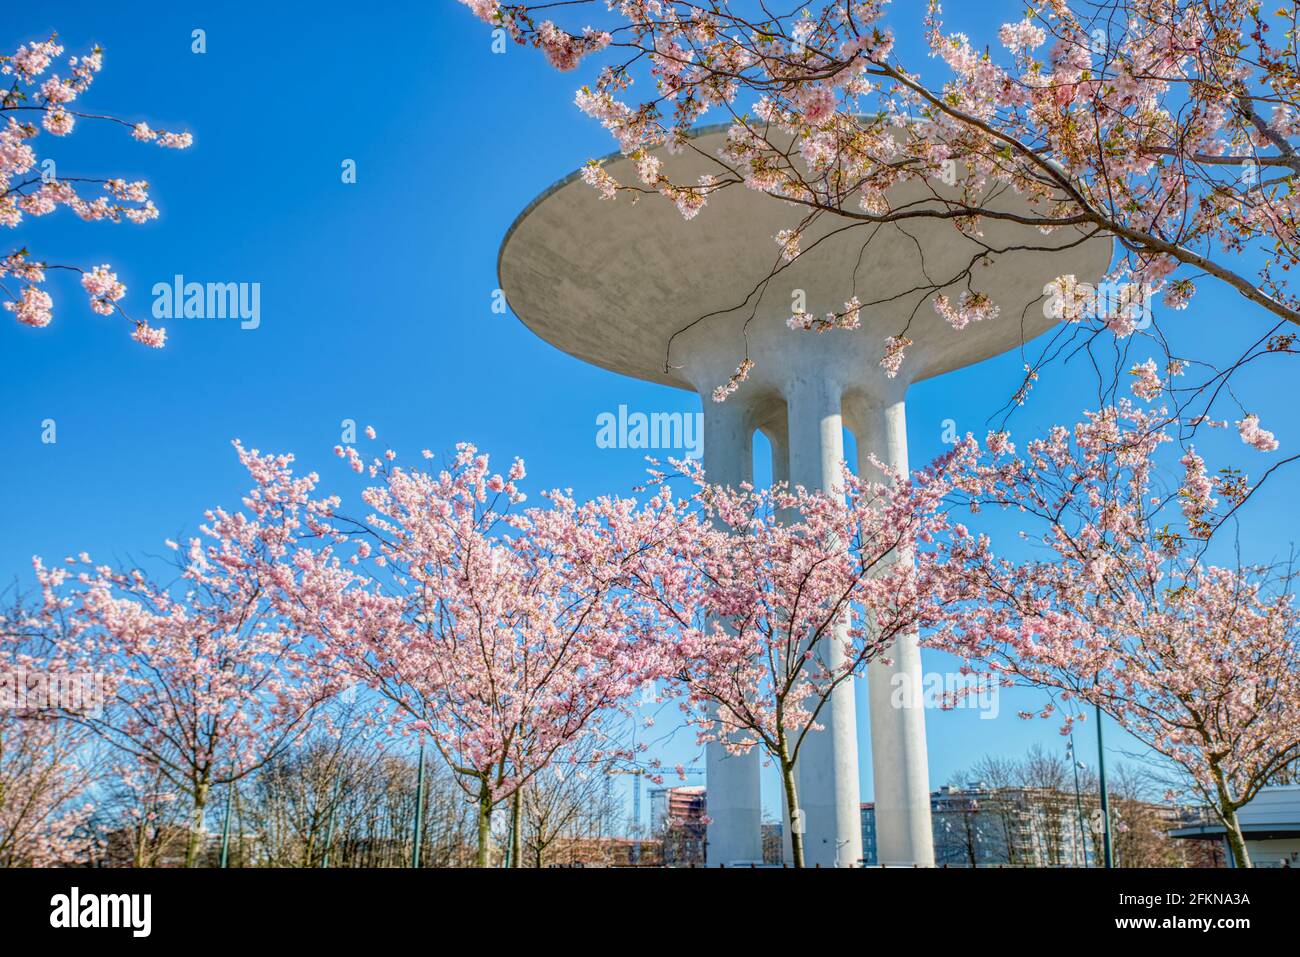 Sakura cherry tree branches full of pink blossoms or flowers at Hyllie Vattenpark on a sunny spring day with the modern Vattentorn or water tower Stock Photo